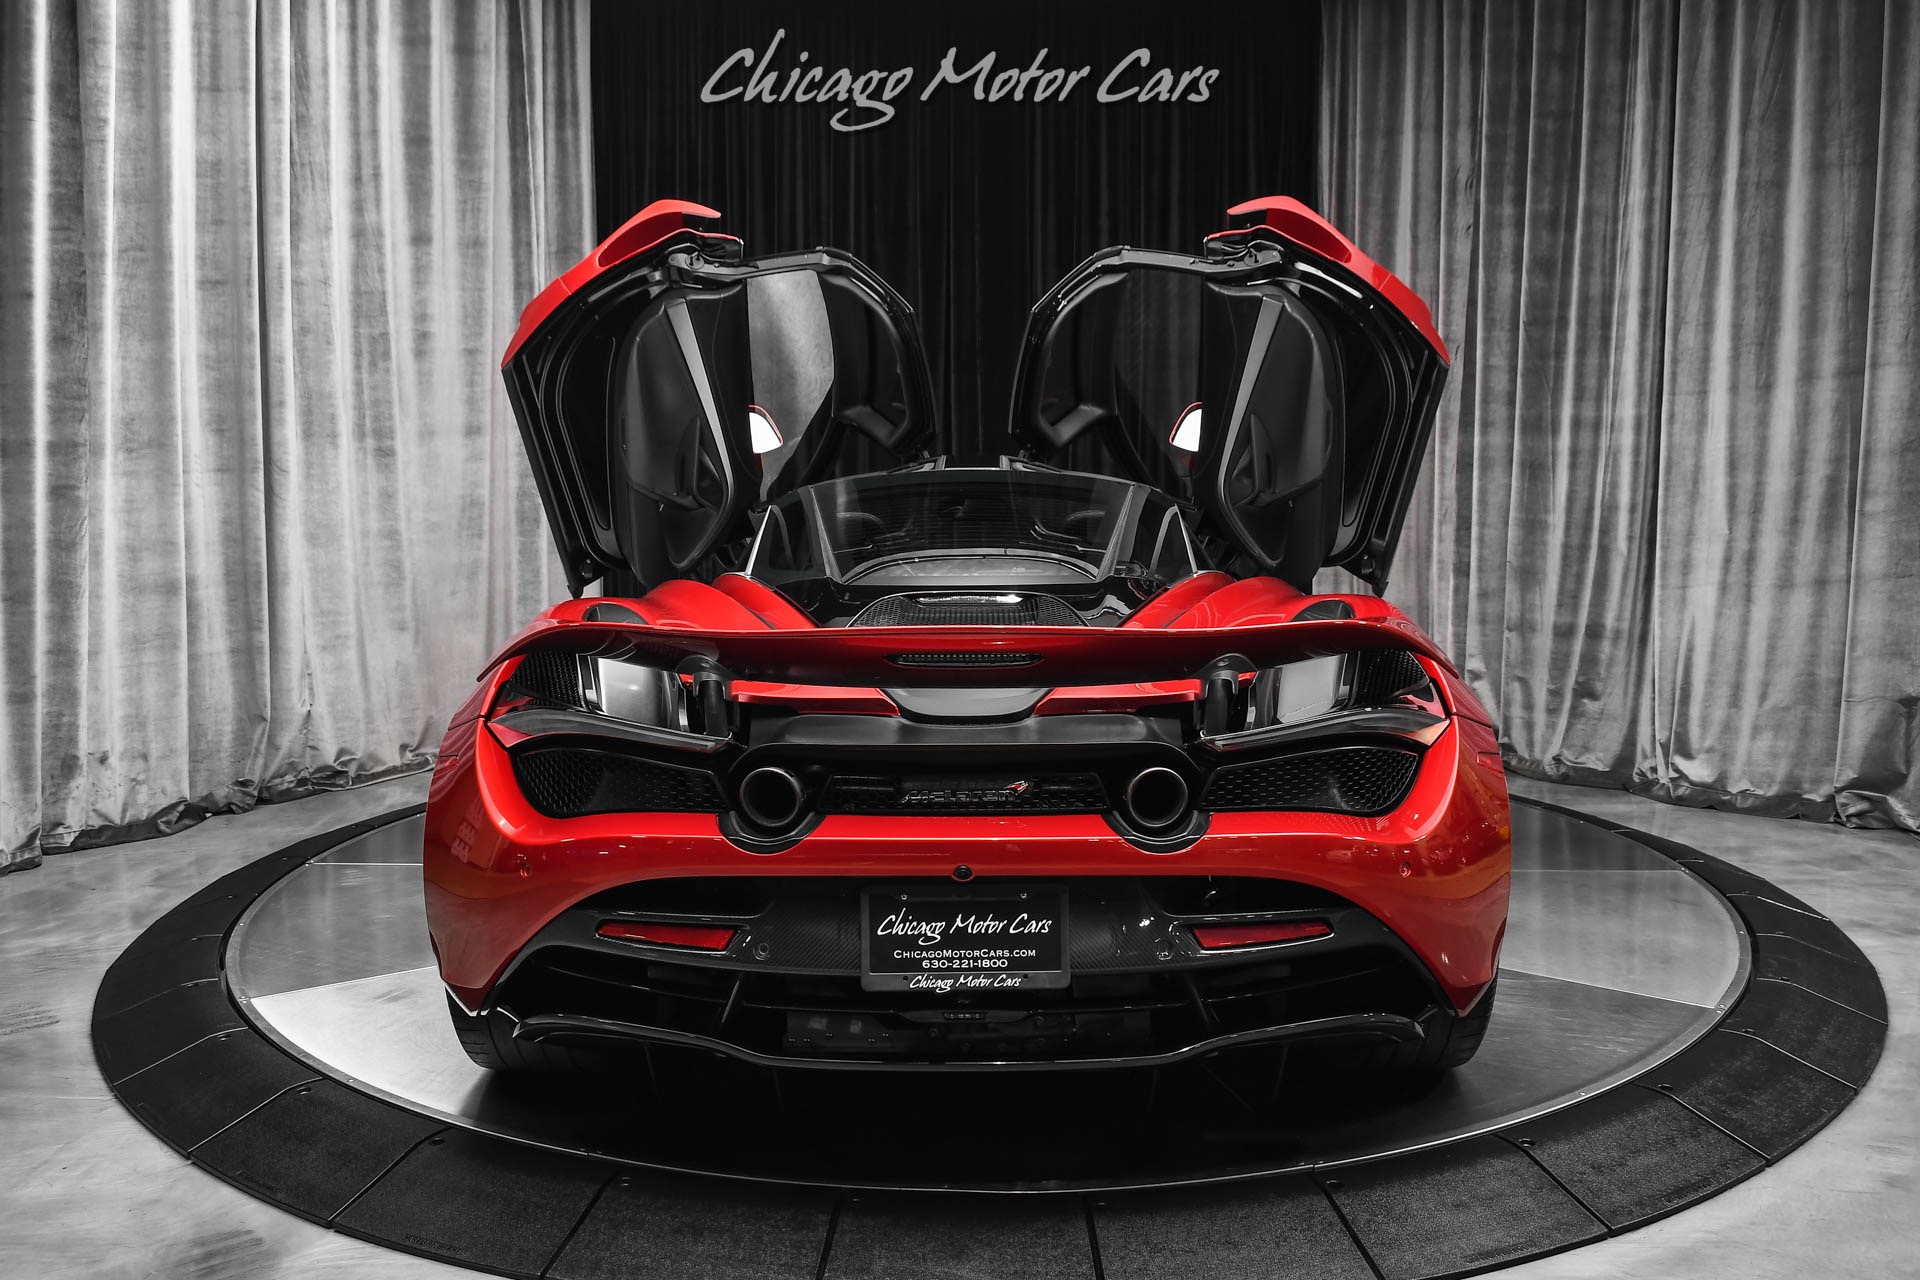 Used-2019-McLaren-720S-Luxury-Coupe-Carbon-Upgrade-Pack-2-Front-Lift-MSRP-353K